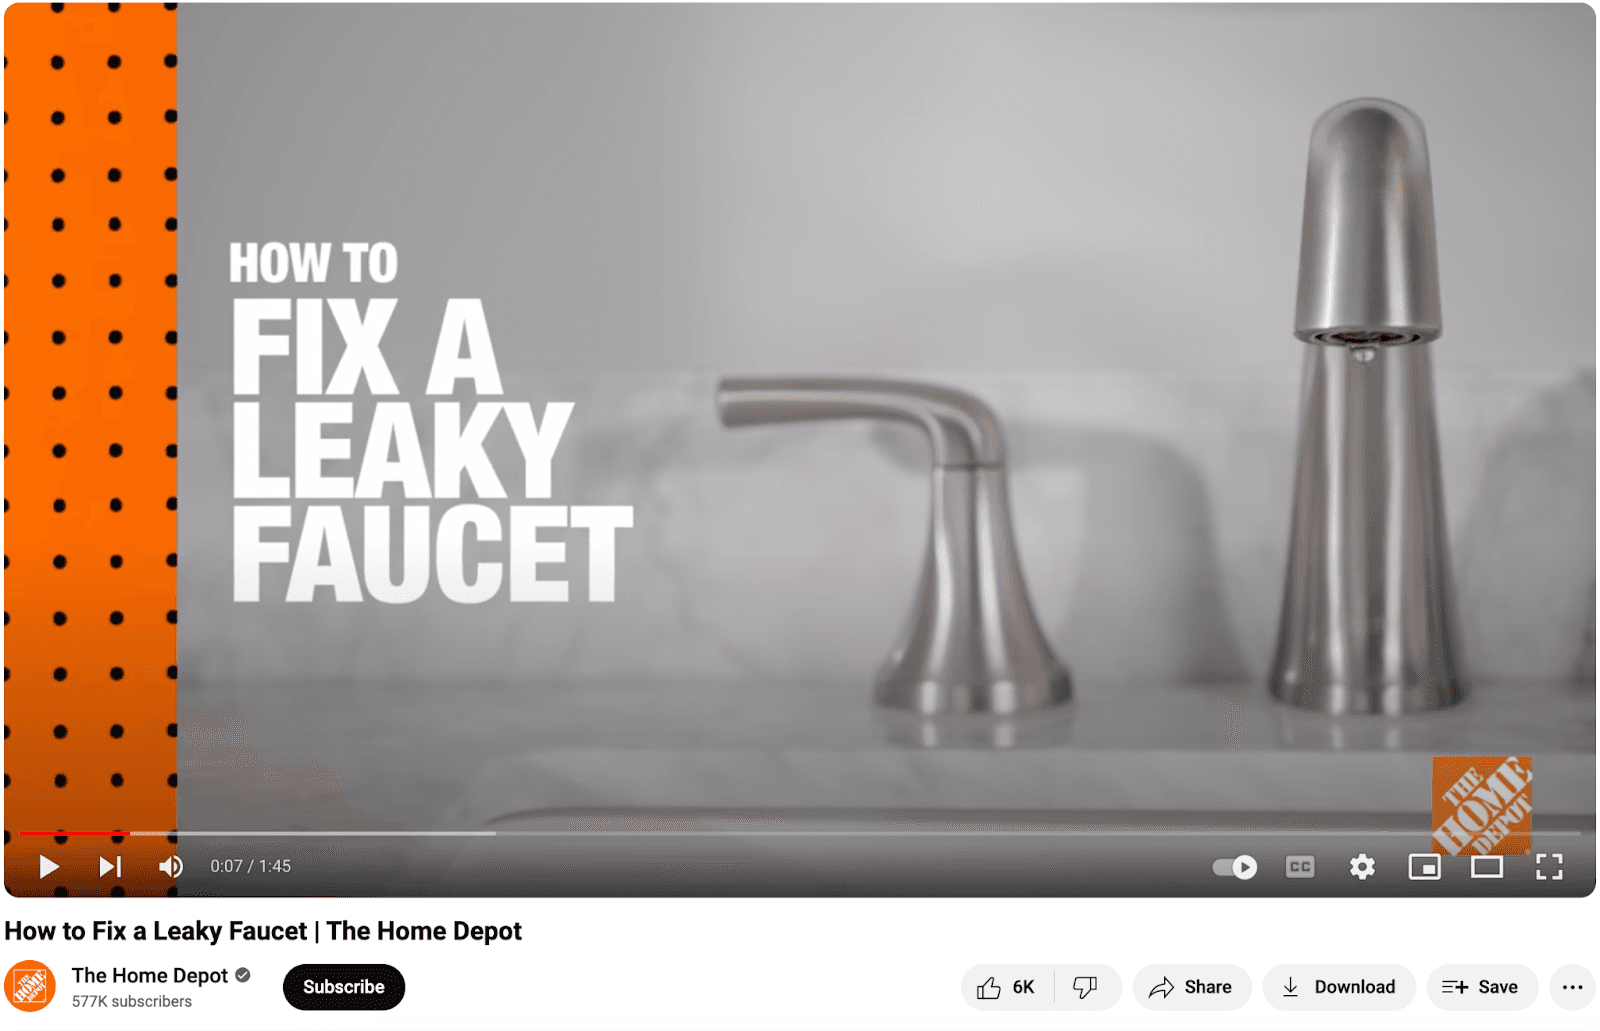 Example of video marketing from Home Depot